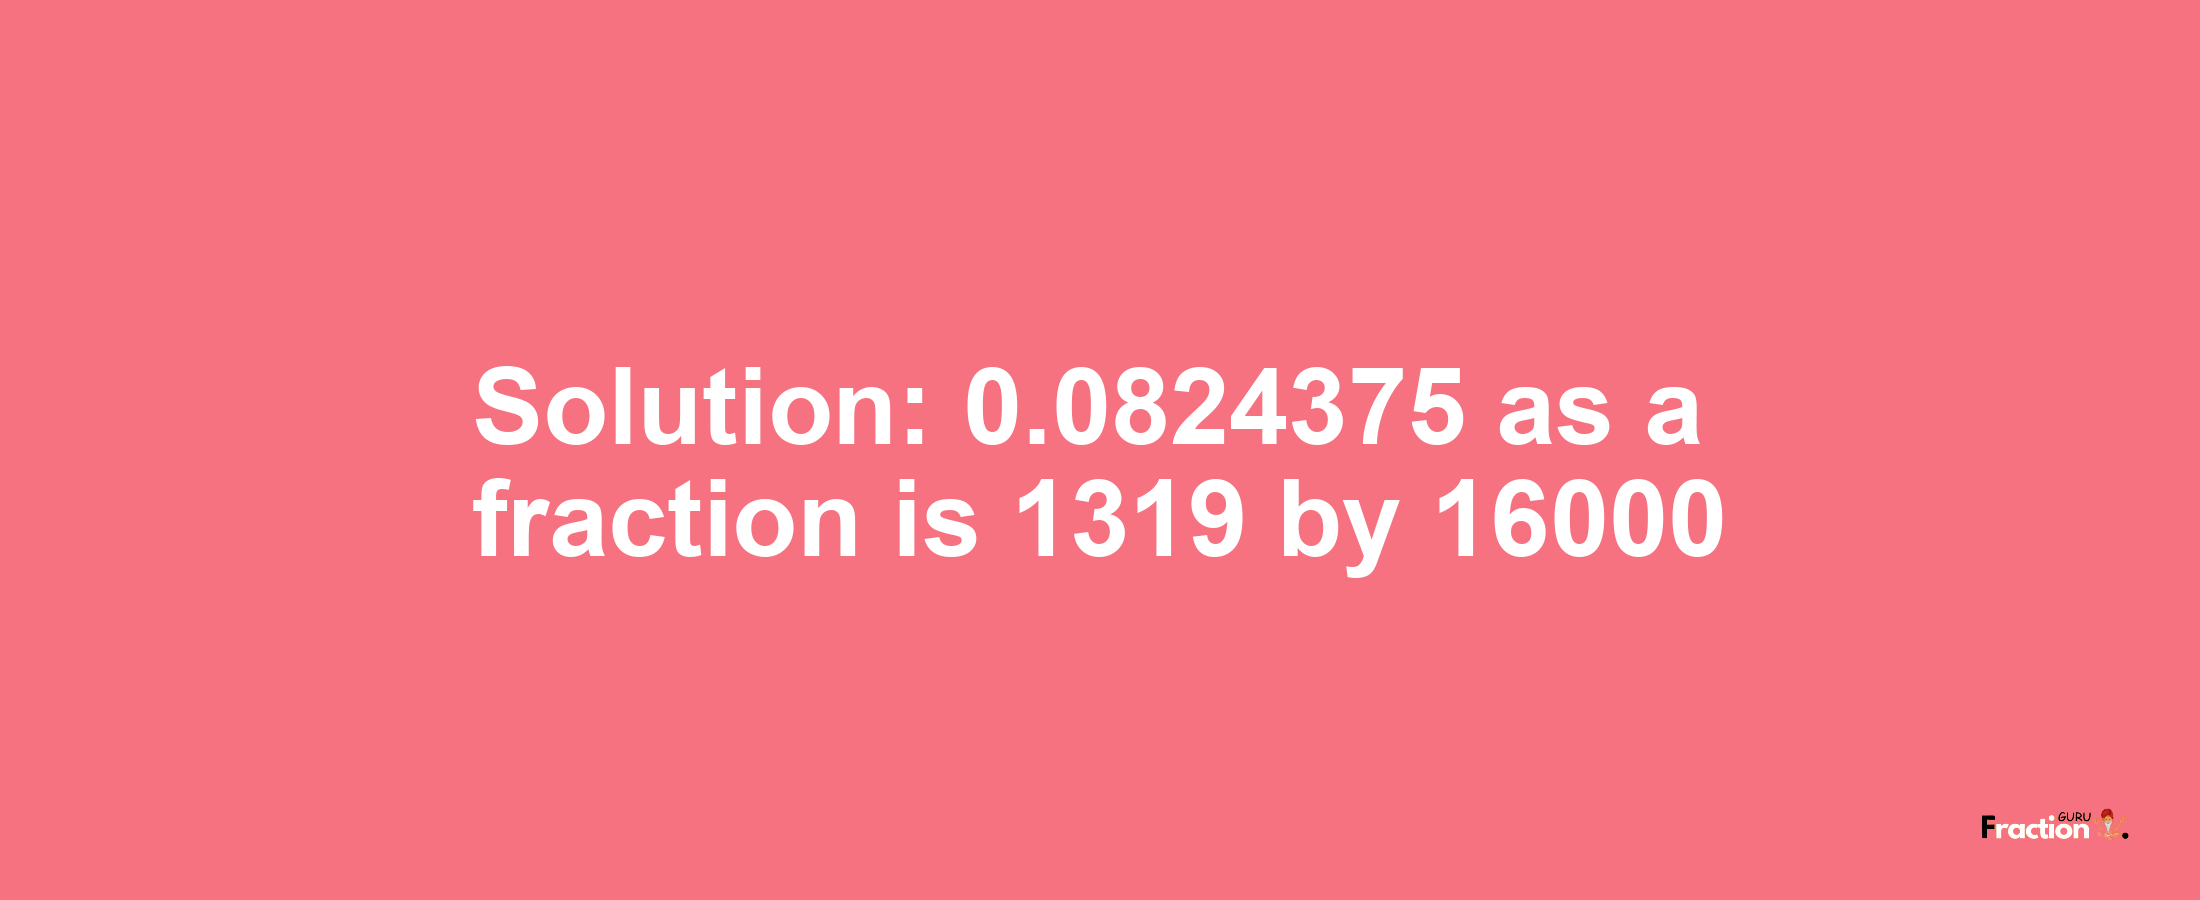 Solution:0.0824375 as a fraction is 1319/16000